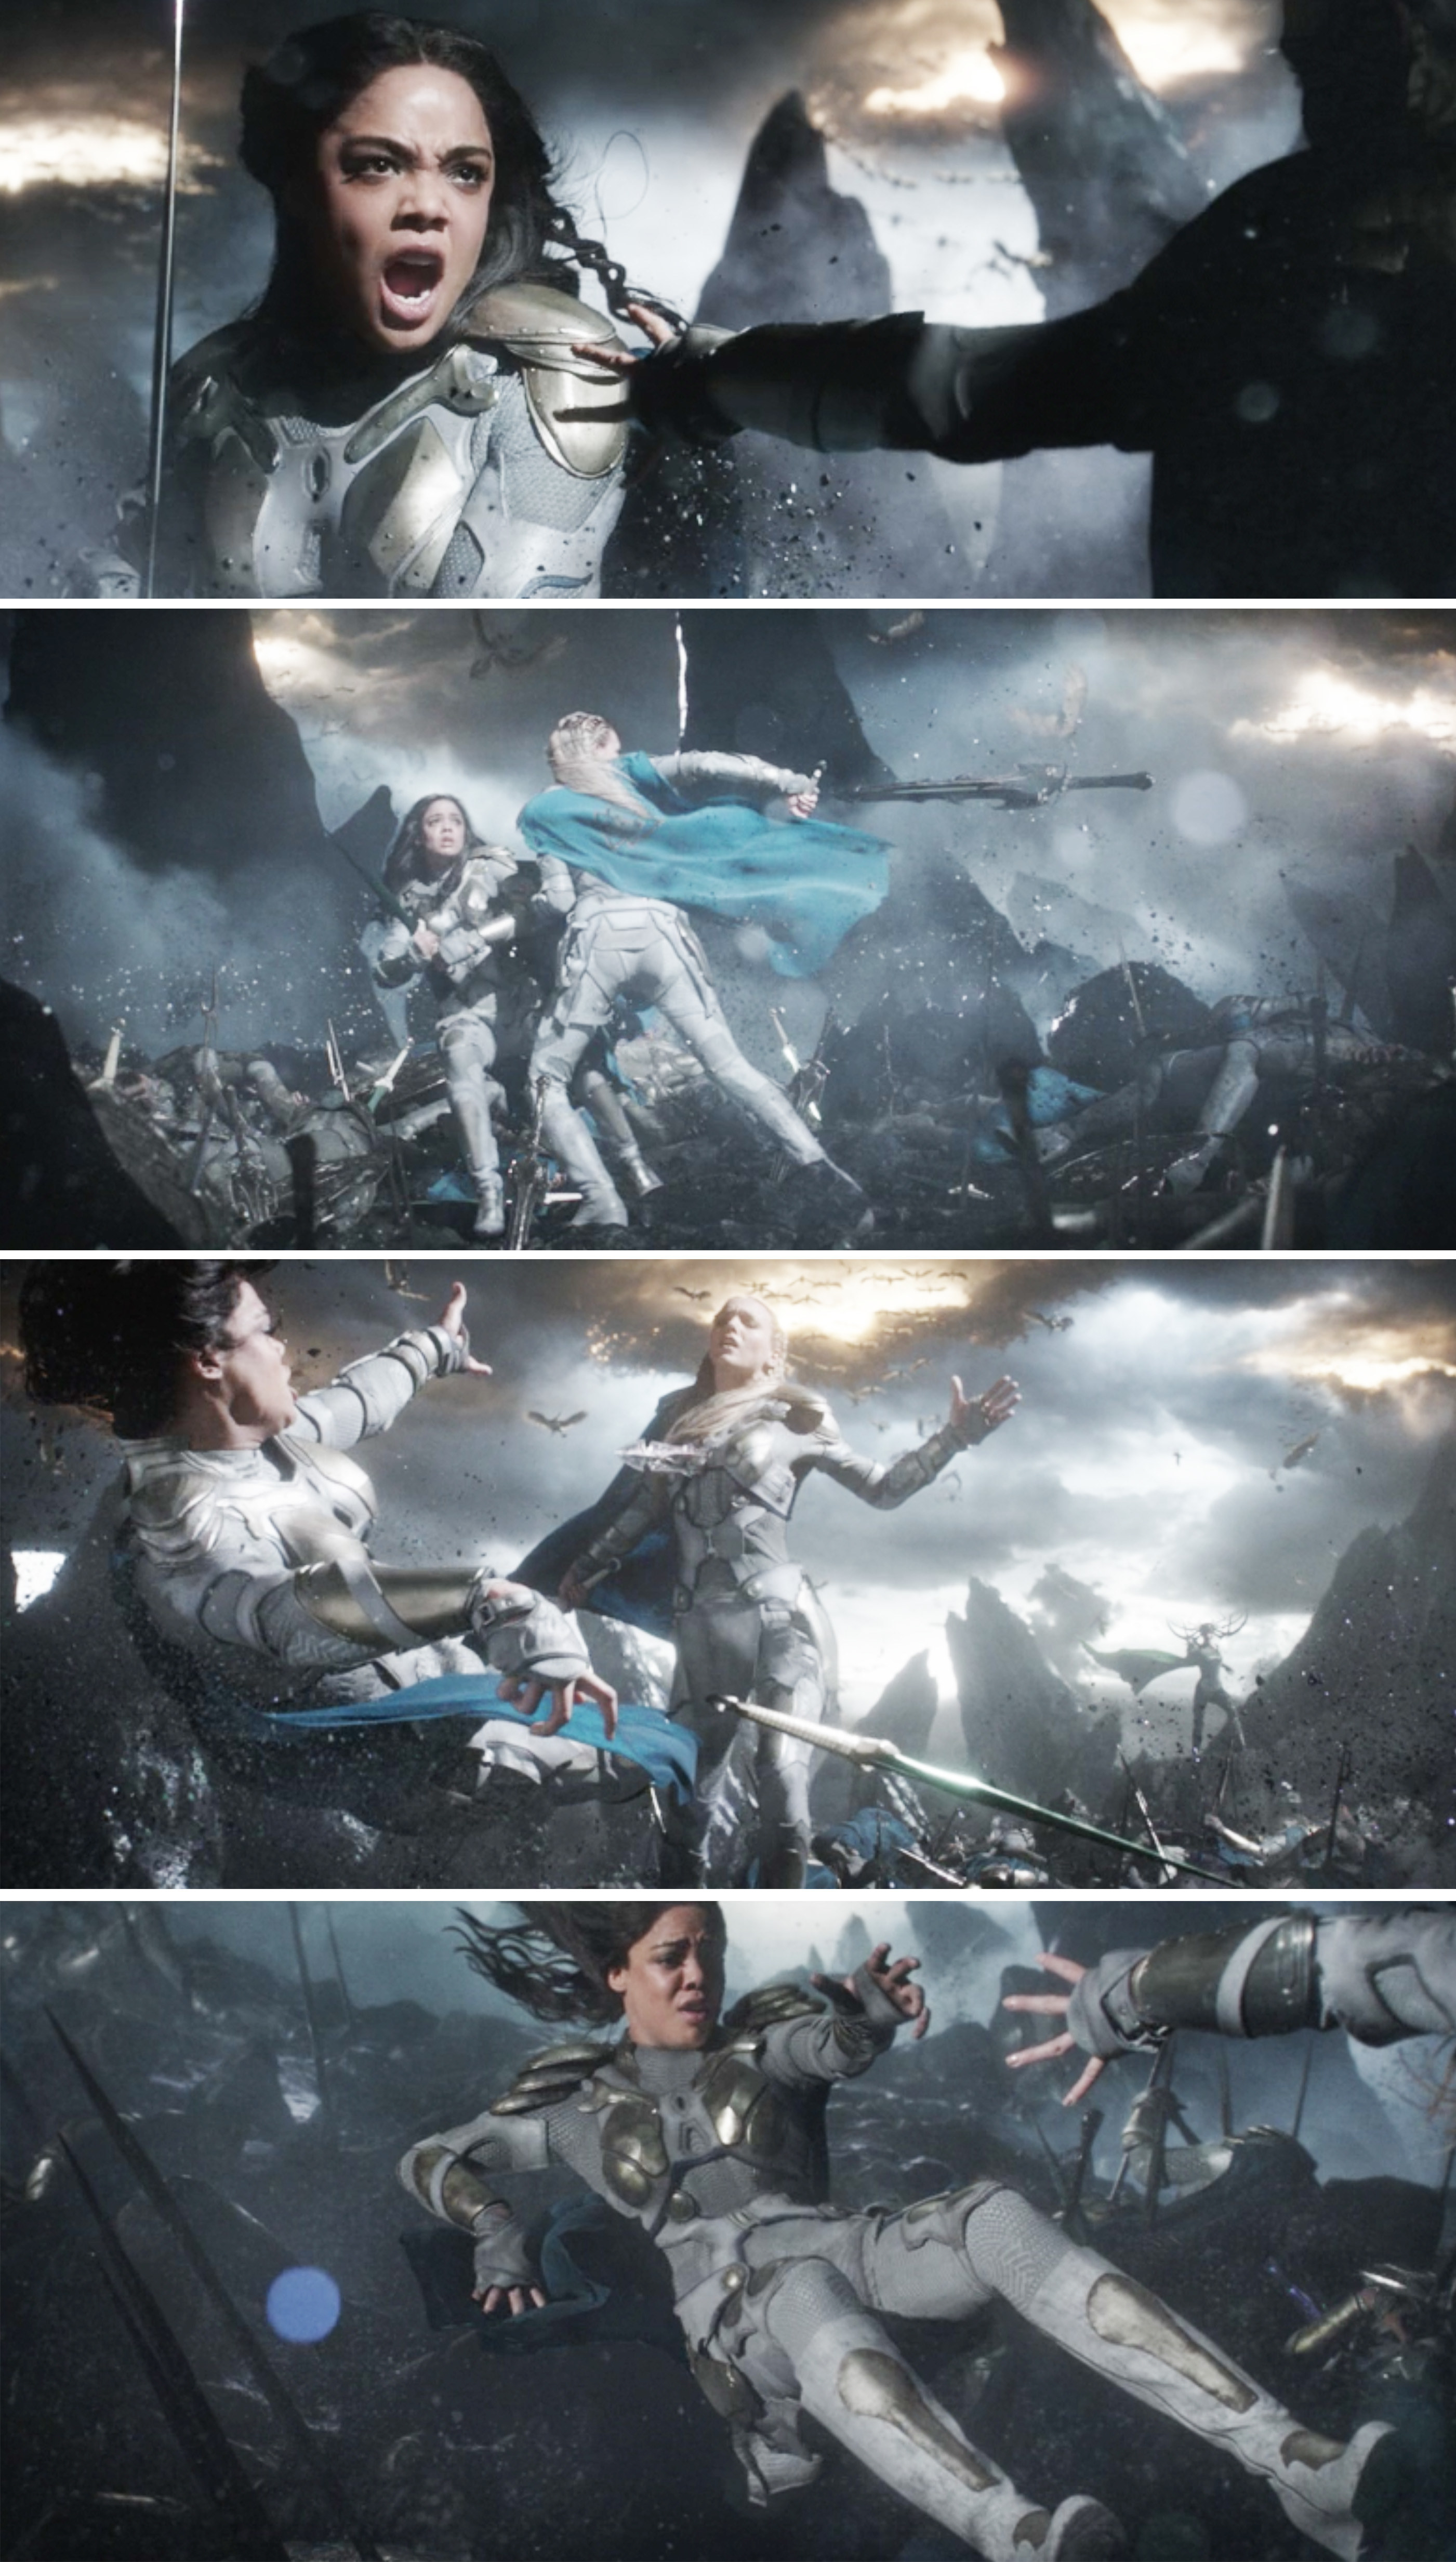 Valkyrie fighting in a battle